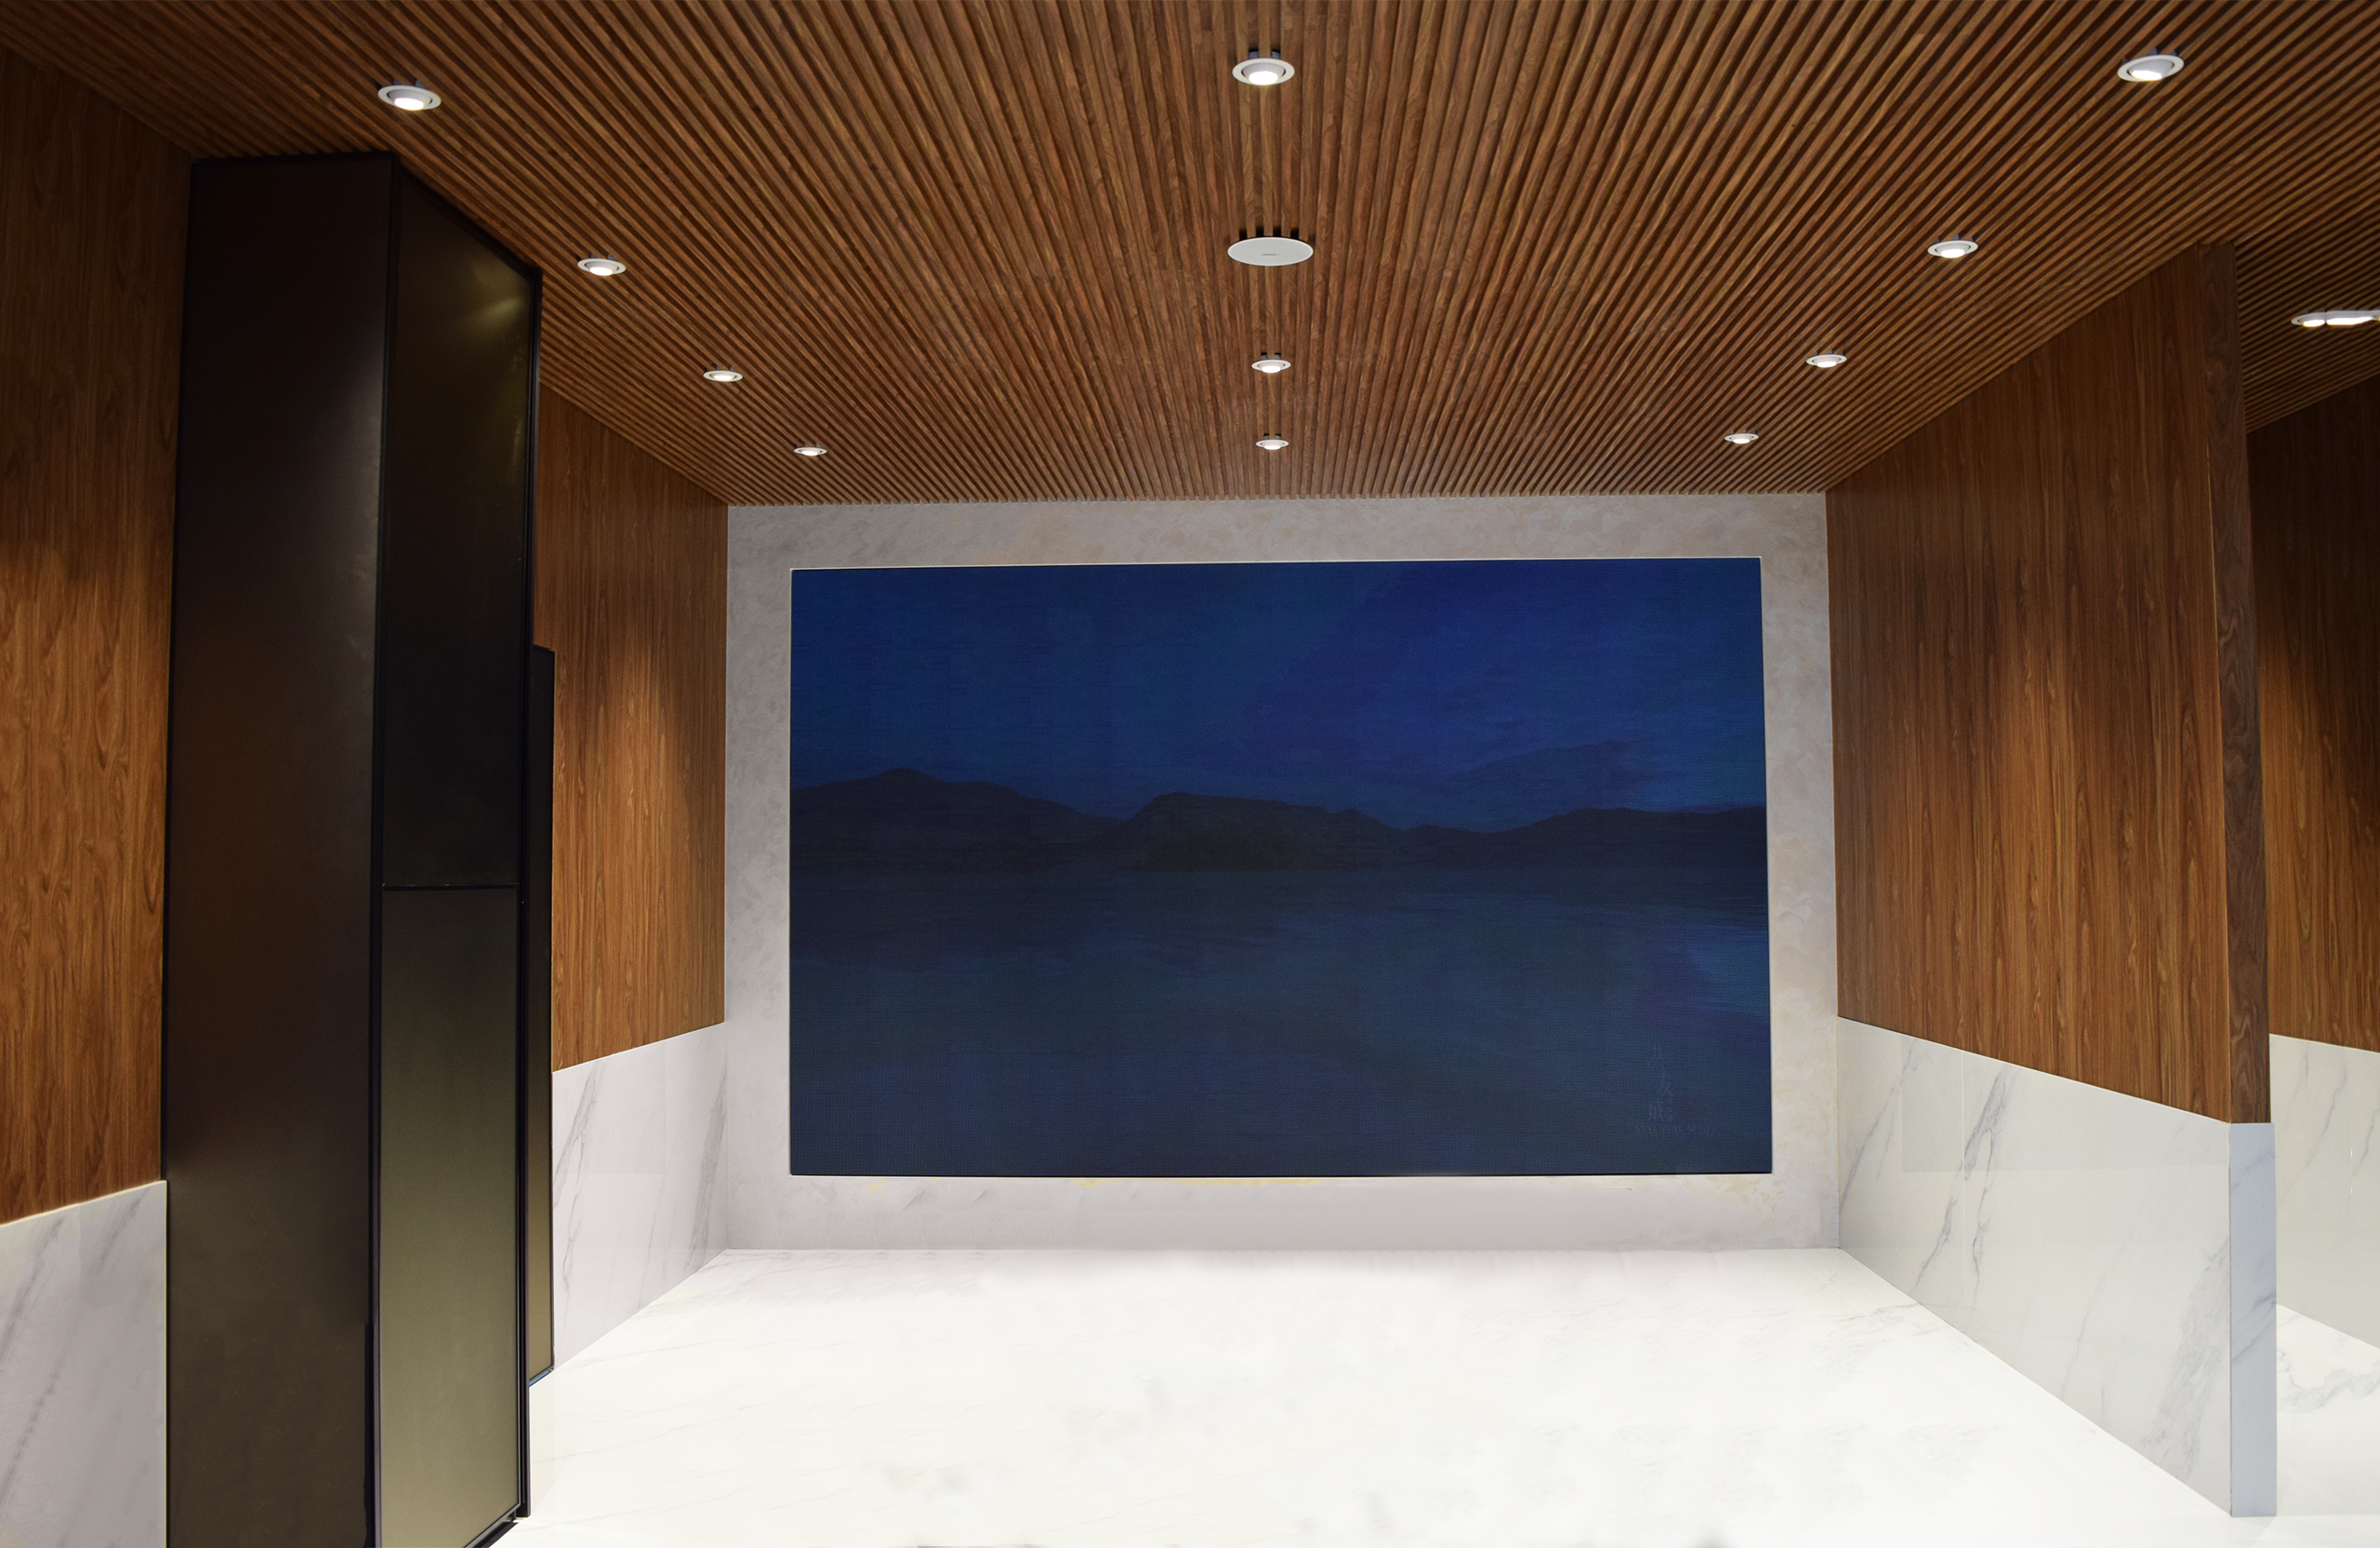 Modern luxury commercial interior design ang yew seng parlour marble wainscotting wooden wall and fluted panel ceiling